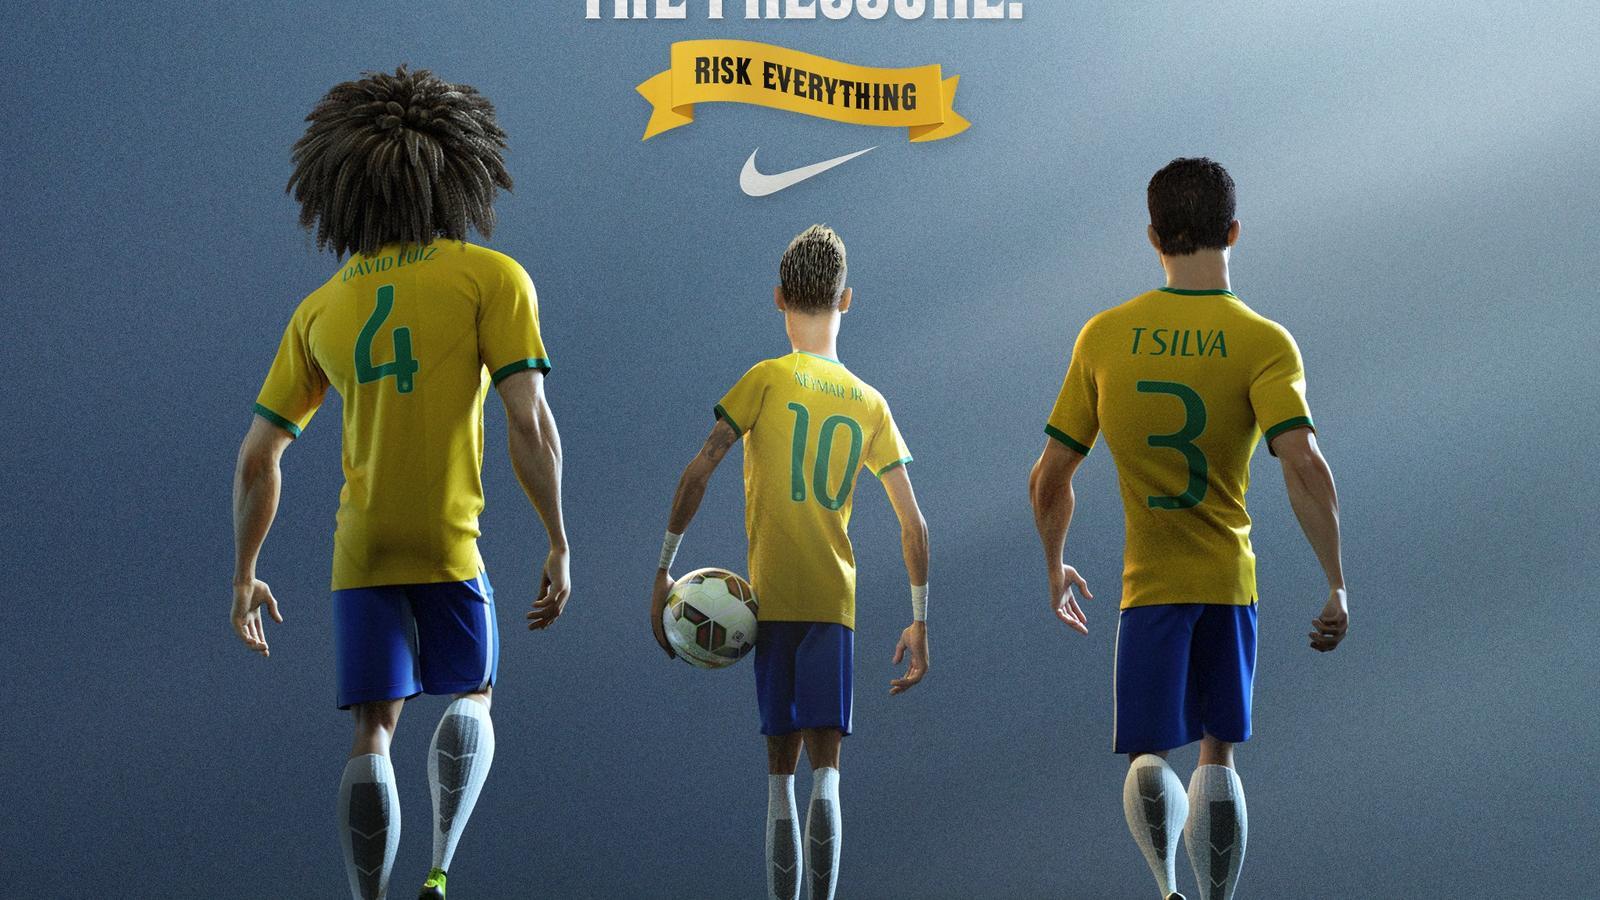 Nike Football Extends The Last Game film with Animated Zlatan